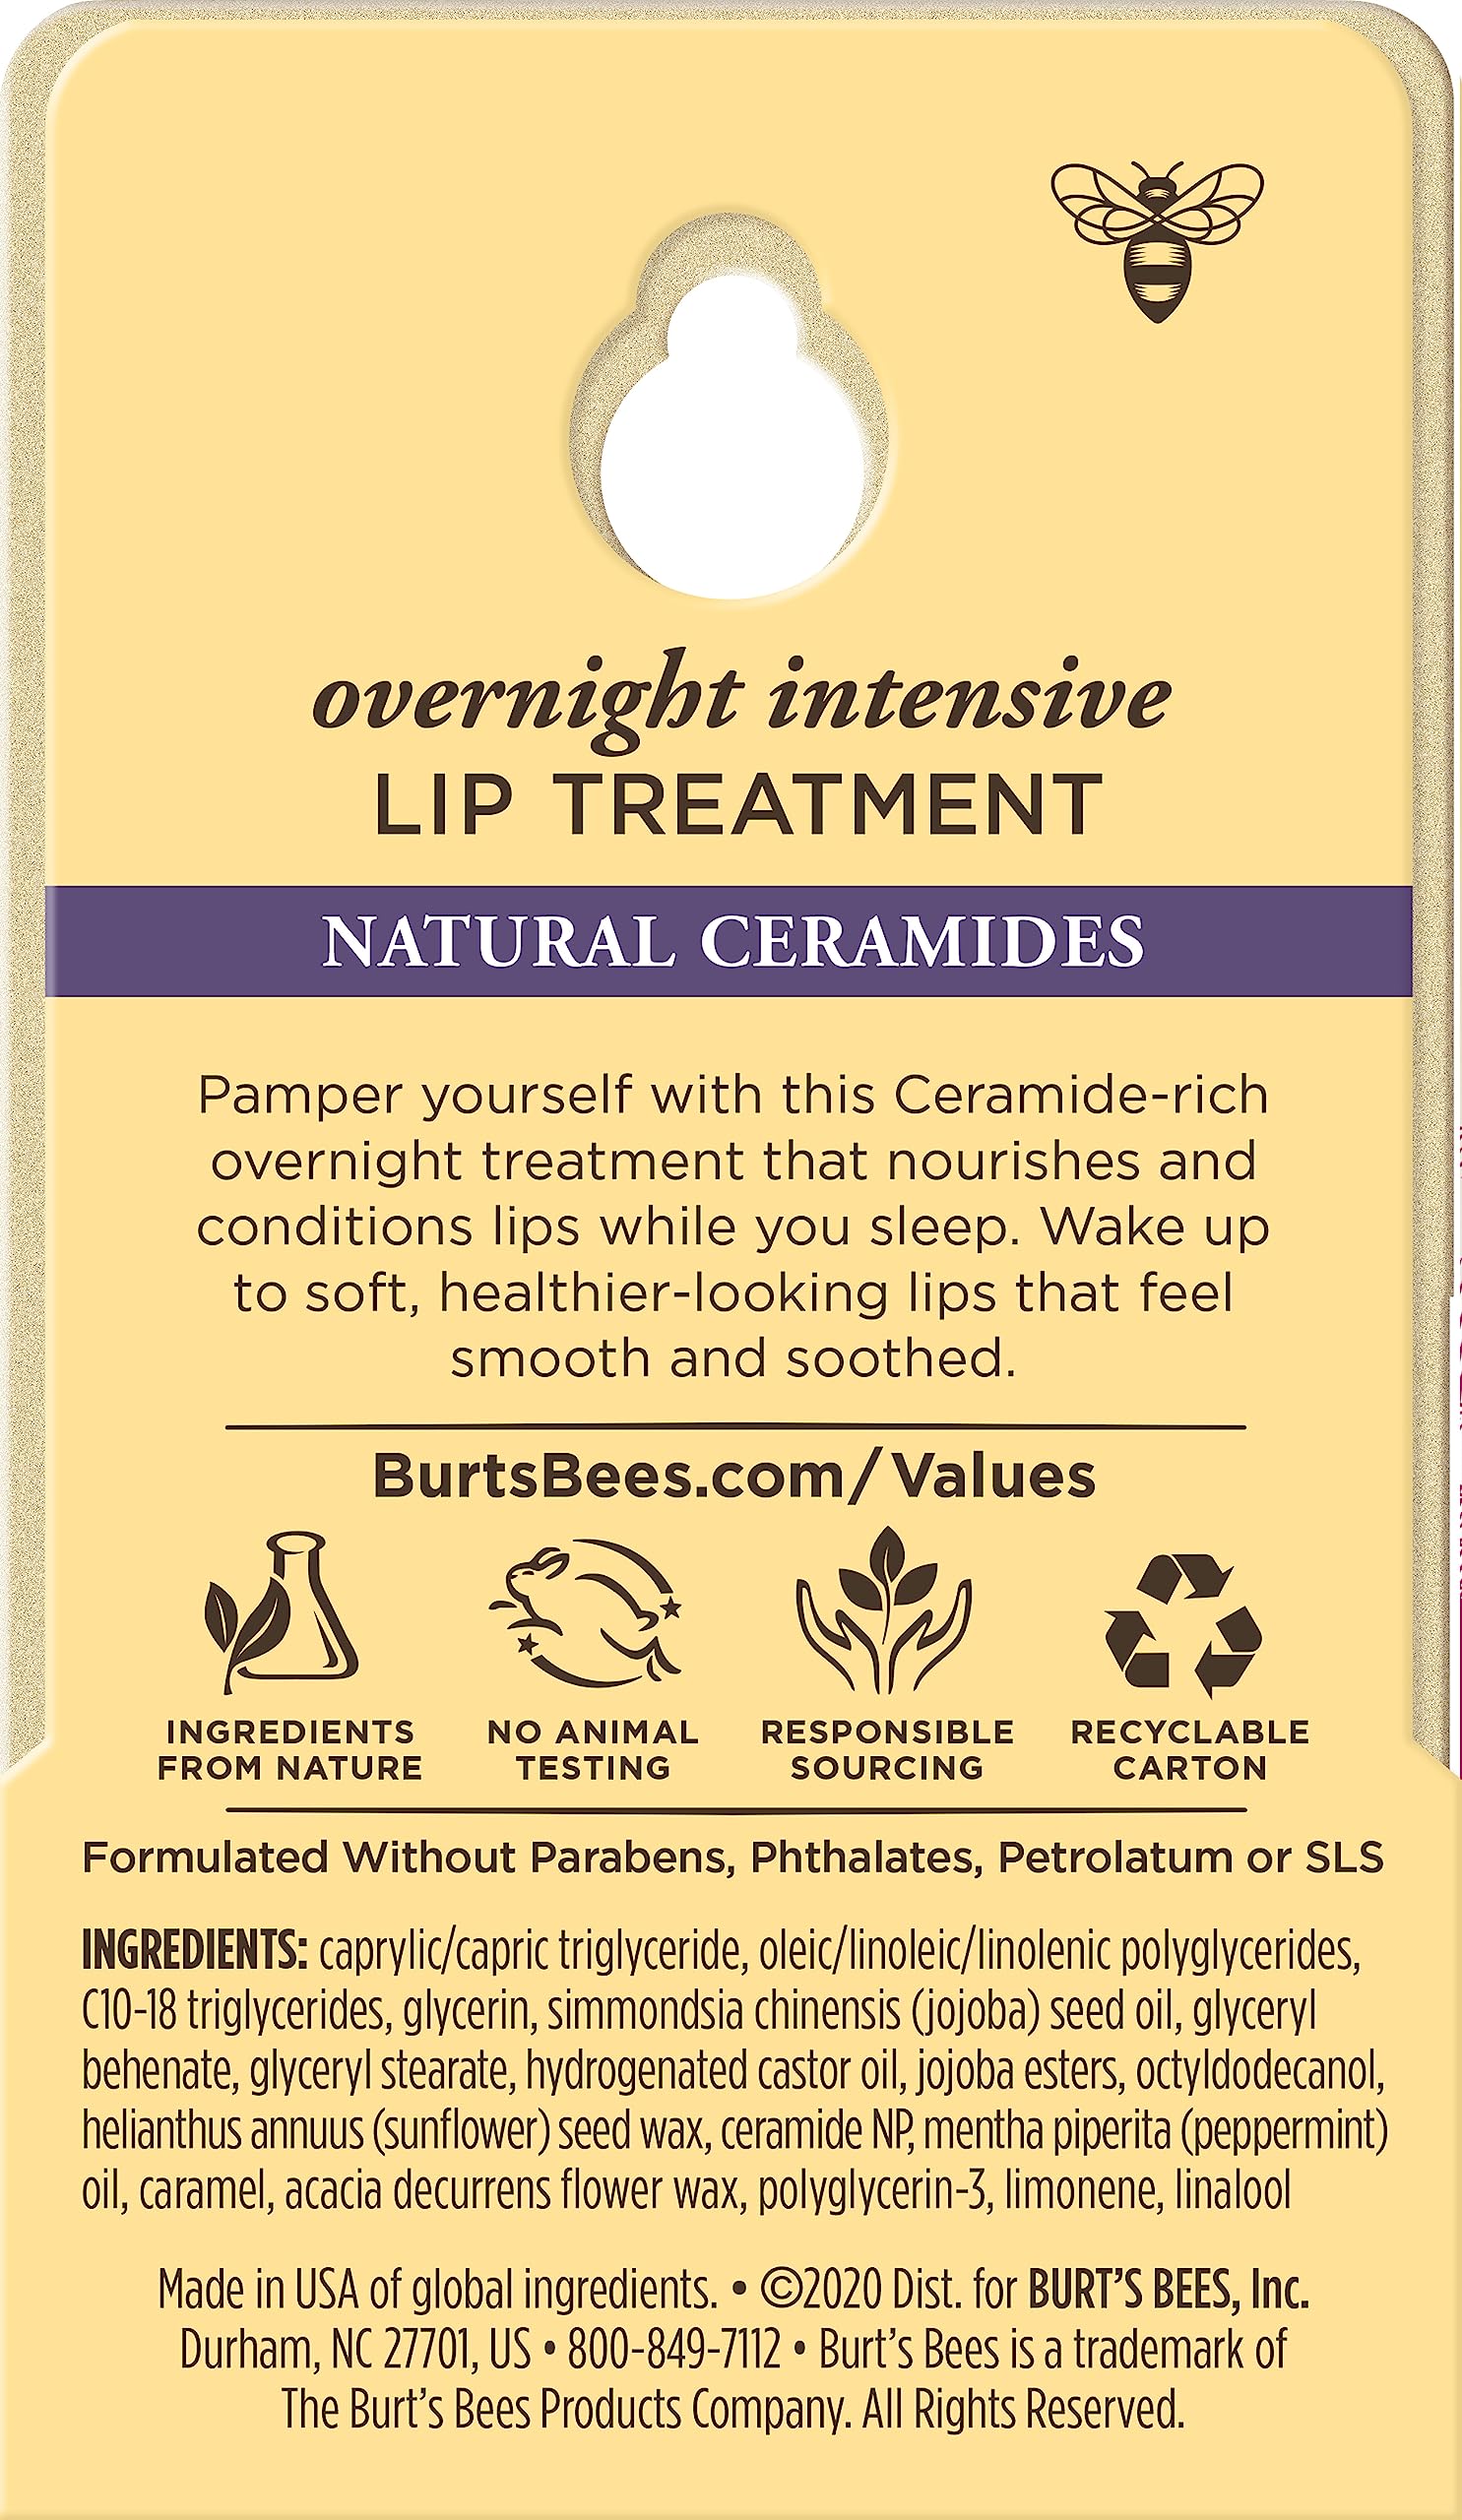 Burts Bees Overnight Intensive Lip Treatment with and Ceramides, Lip Hydrates Lips 8 Hours, Natural Origin, 0.25 oz